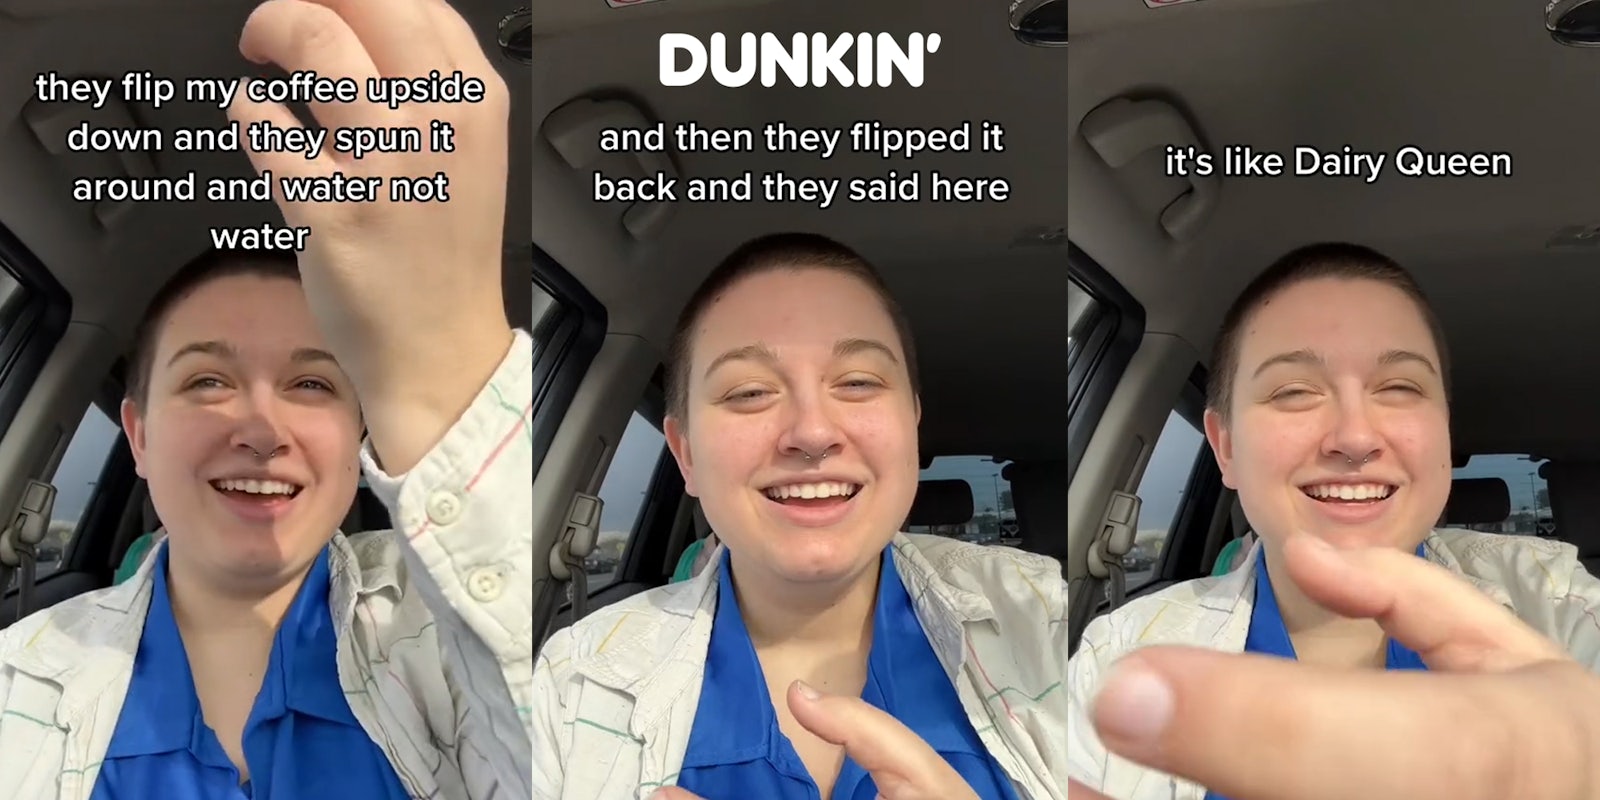 customer speaking in car with hand up with caption 'they flip my coffee upside down and they spun it around and water not water' (l) customer speaking in car with caption 'and then they flipped it back and they said here' with Dunkin' logo above (c) customer speaking in car with hand out with caption 'it's like Dairy Queen' (r)